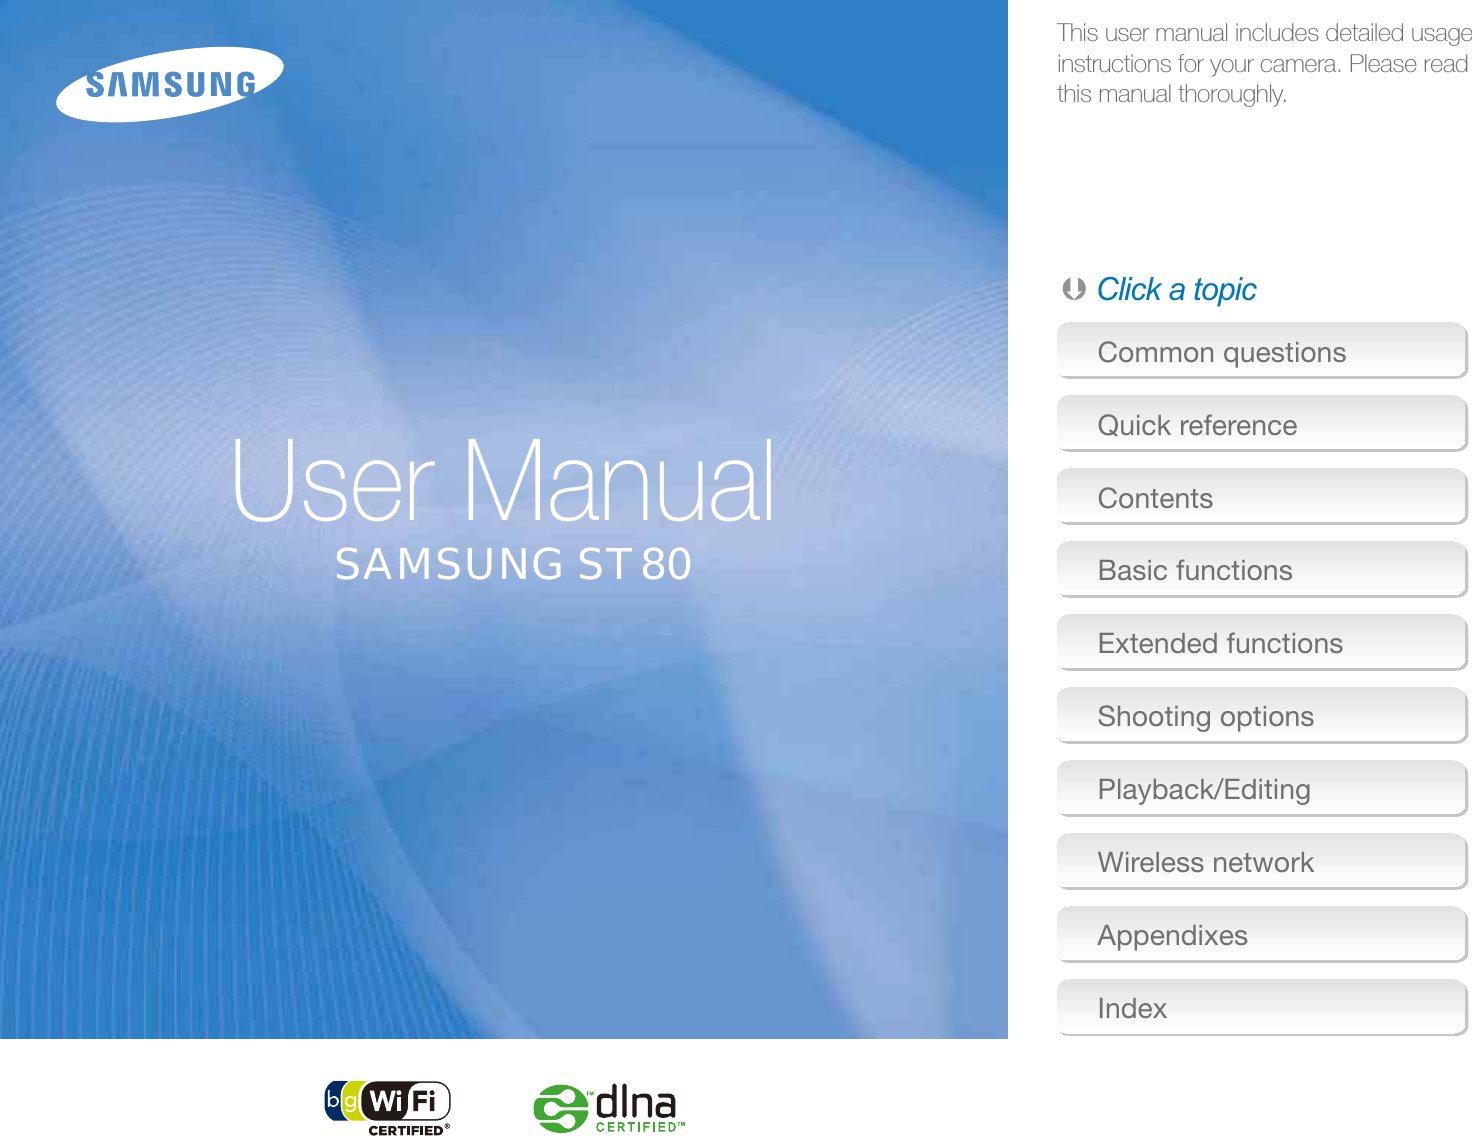 This user manual includes detailed usage instructions for your camera. Please read  this manual thoroughly.Ä Click a topicUser ManualCommon questionsQuick referenceContentsBasic functionsExtended functionsShooting optionsPlayback/EditingWireless networkAppendixesIndexSAMSUNG ST80